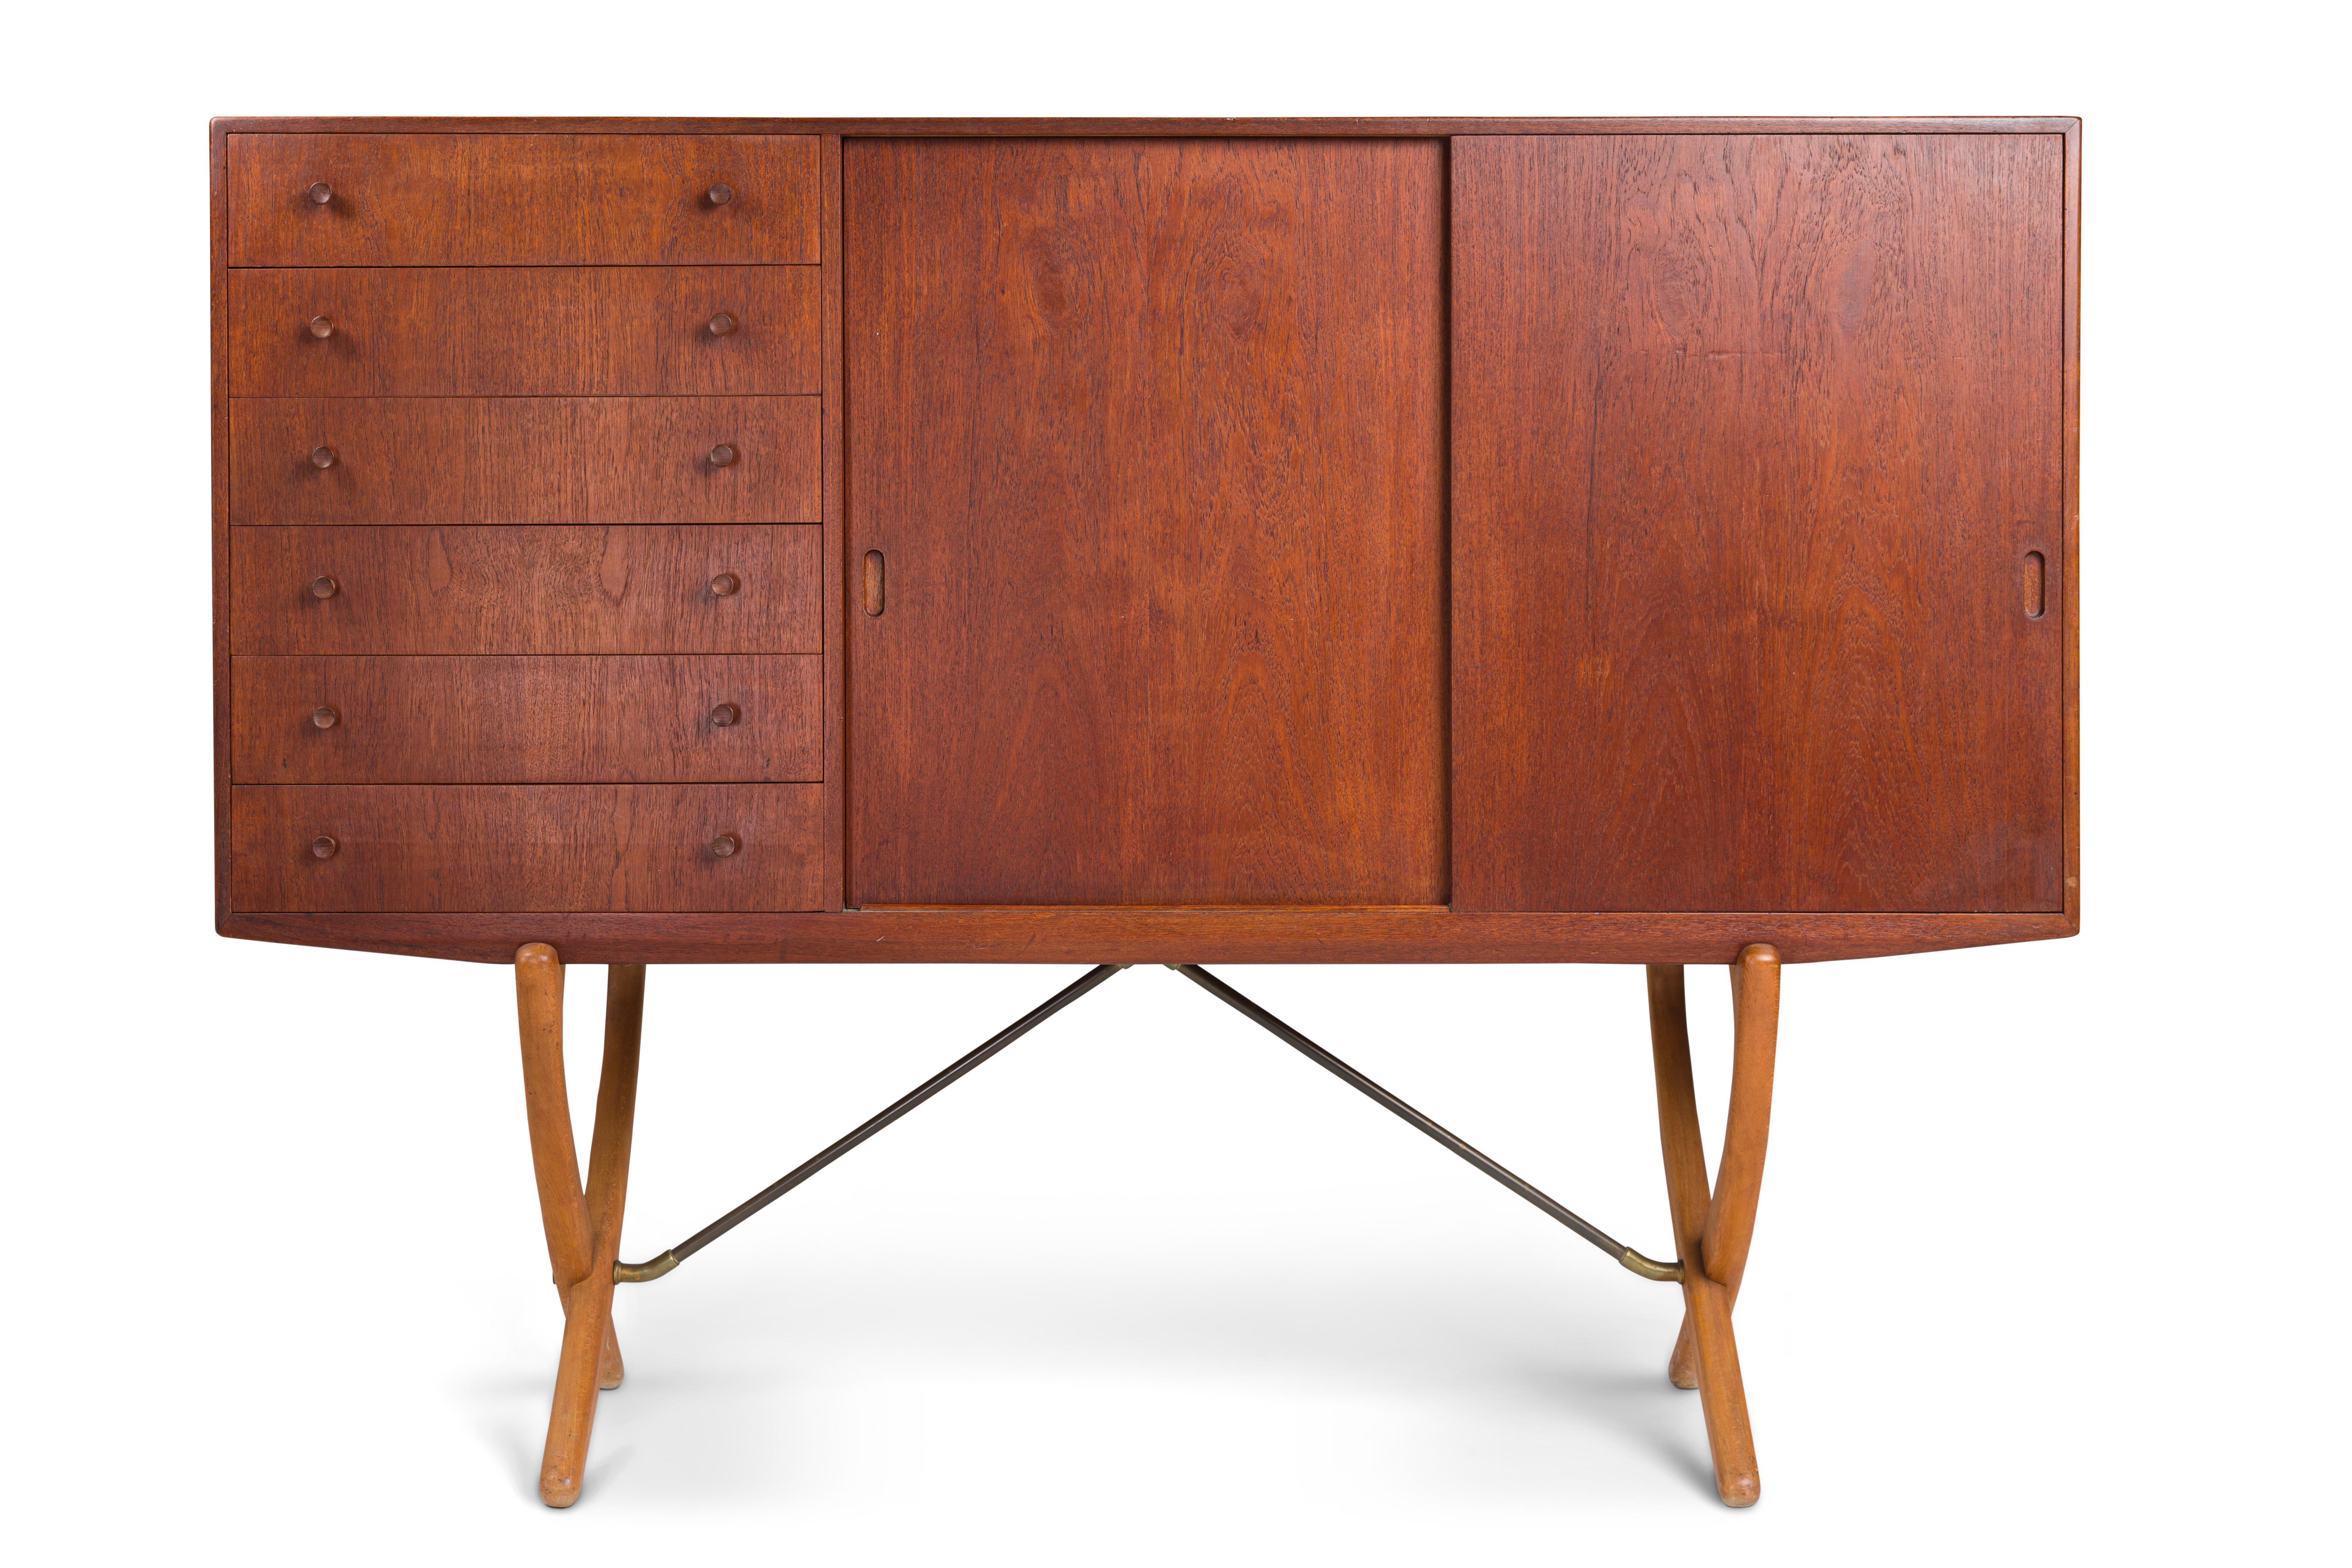 Hans J. Wegner for Carl Hansen & Søn.
Model CH304 sideboard, teak and front with six drawers and two sliding doors enclosing shelves and sliding trays, sabre-formed crossed legs in beech with brass struts.
Shrinkage crack by one leg and repair to